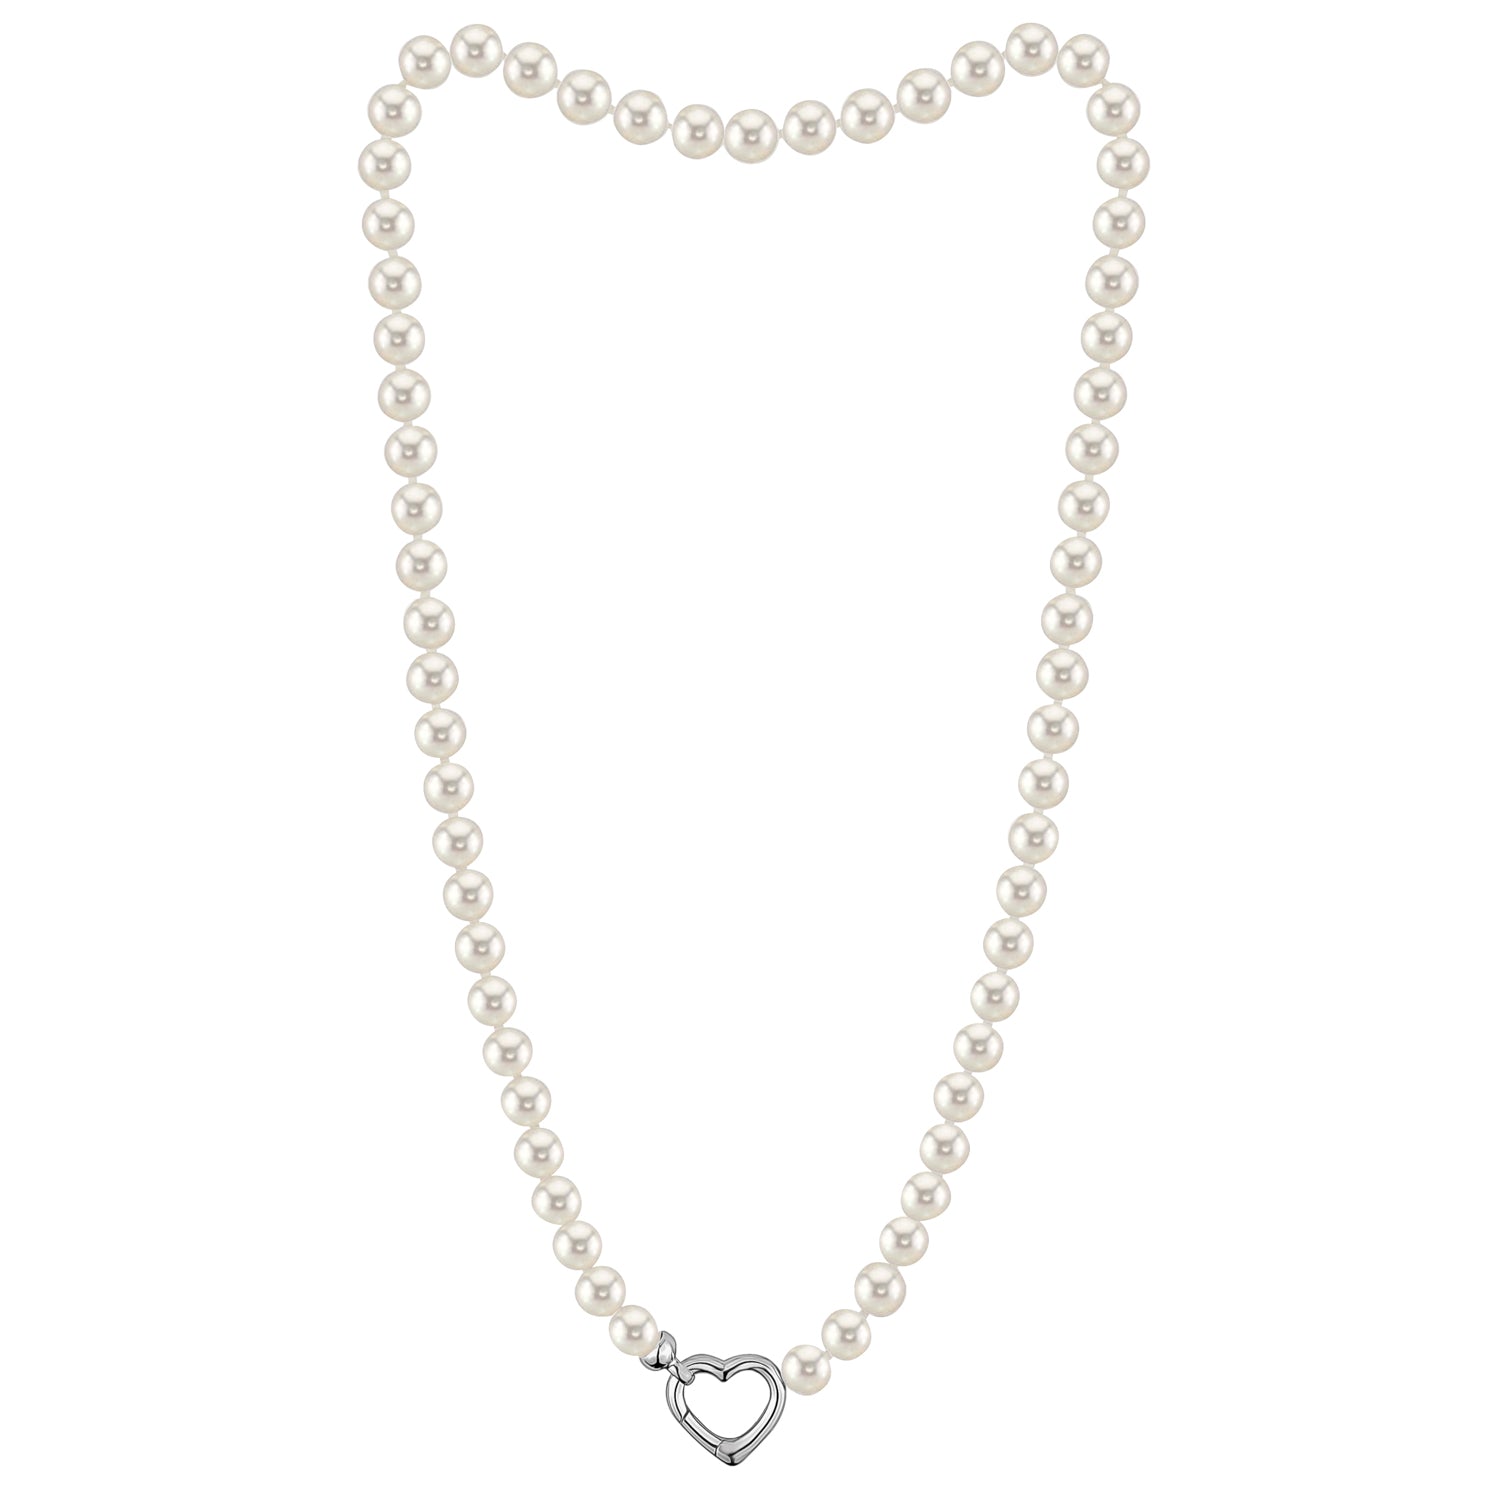 MASSETE White Round Freshwater Cultured Pearl Necklace for Women Sterling Silver Heart Clasp 6.5mm 18"